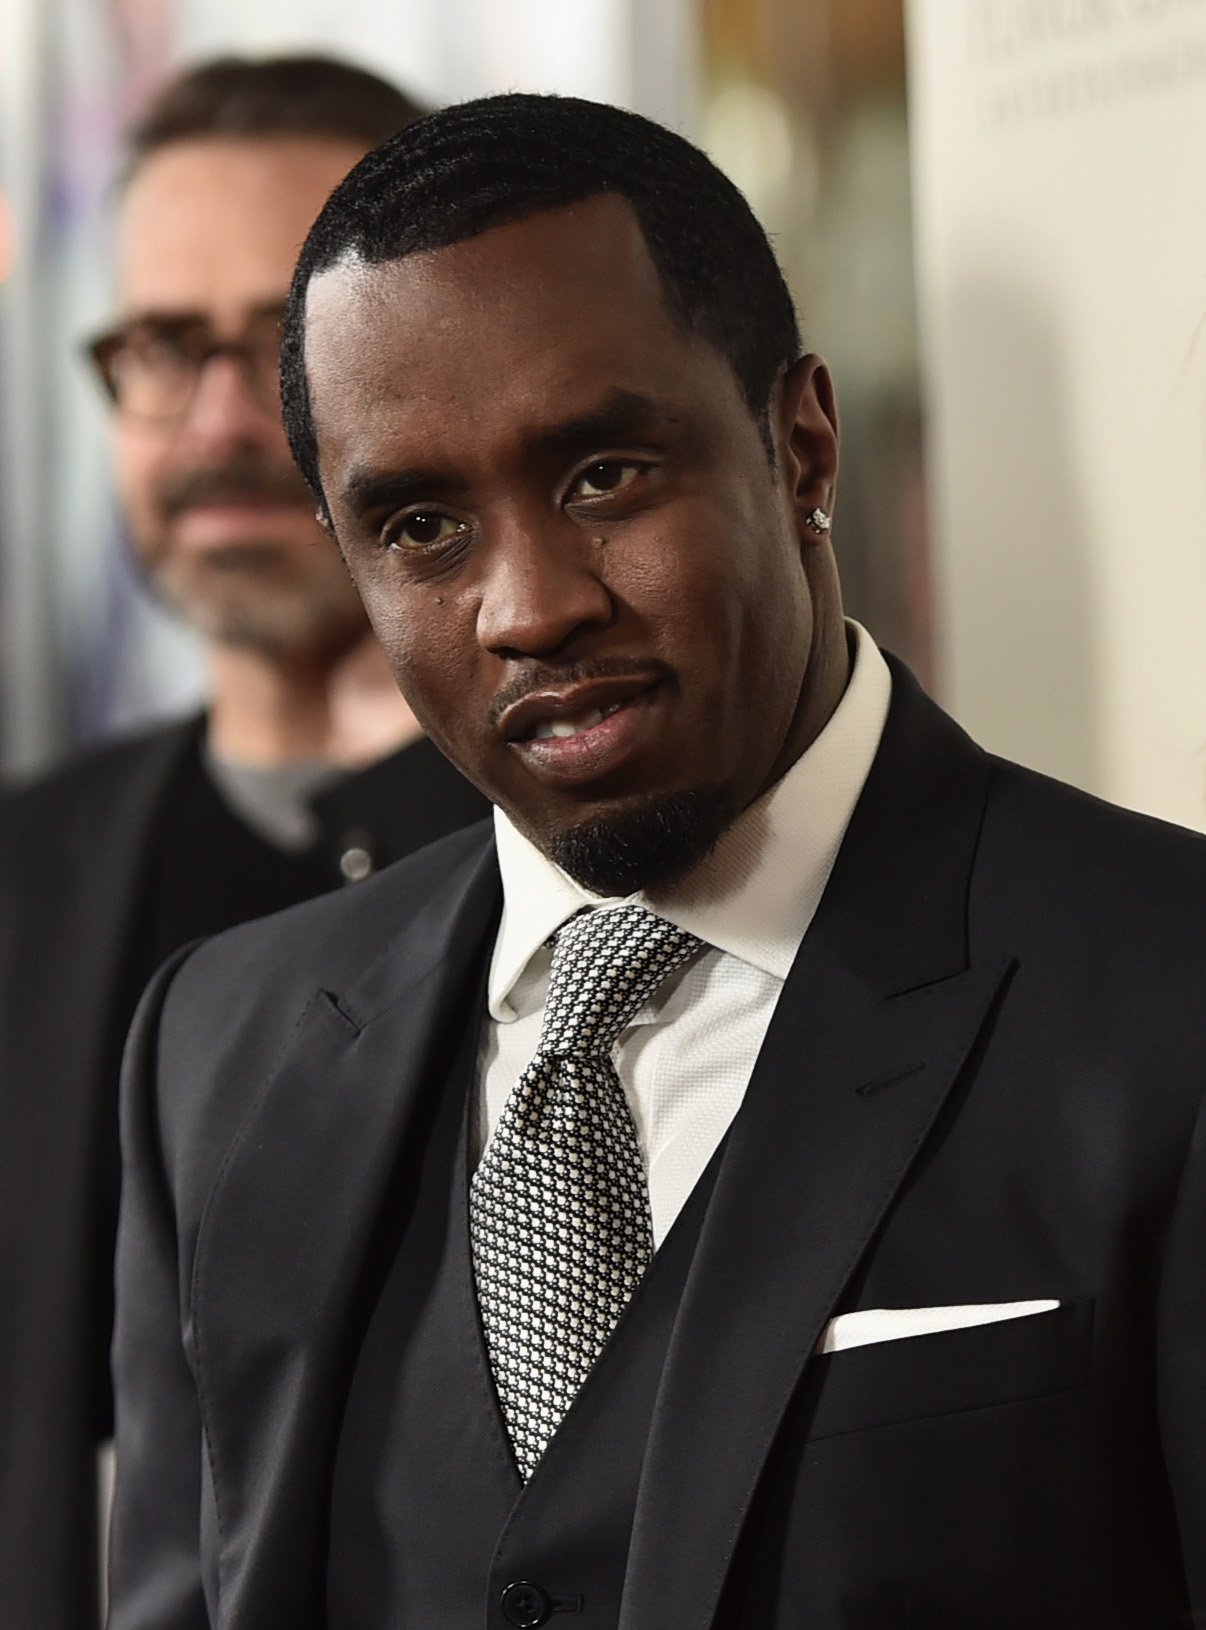 Sean 'Diddy' Combs at the premiere of  'The Perfect Match' on March 7, 2016 in California | Photo: Getty Images